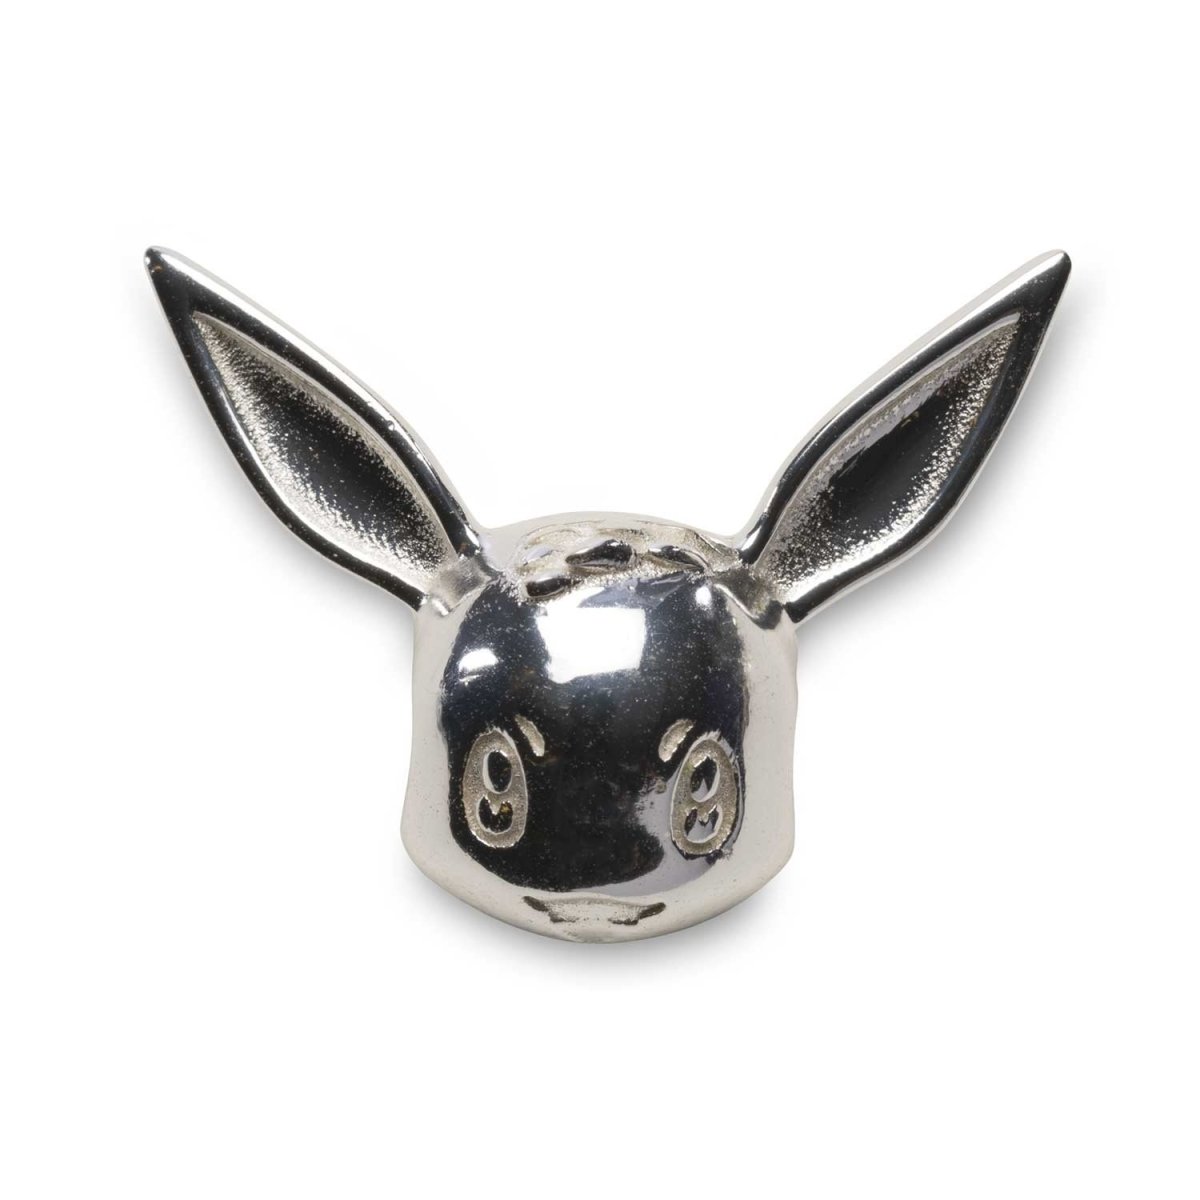 Pokémon Jewelry - Charms: Soul Badge Sterling Silver Bead Charm